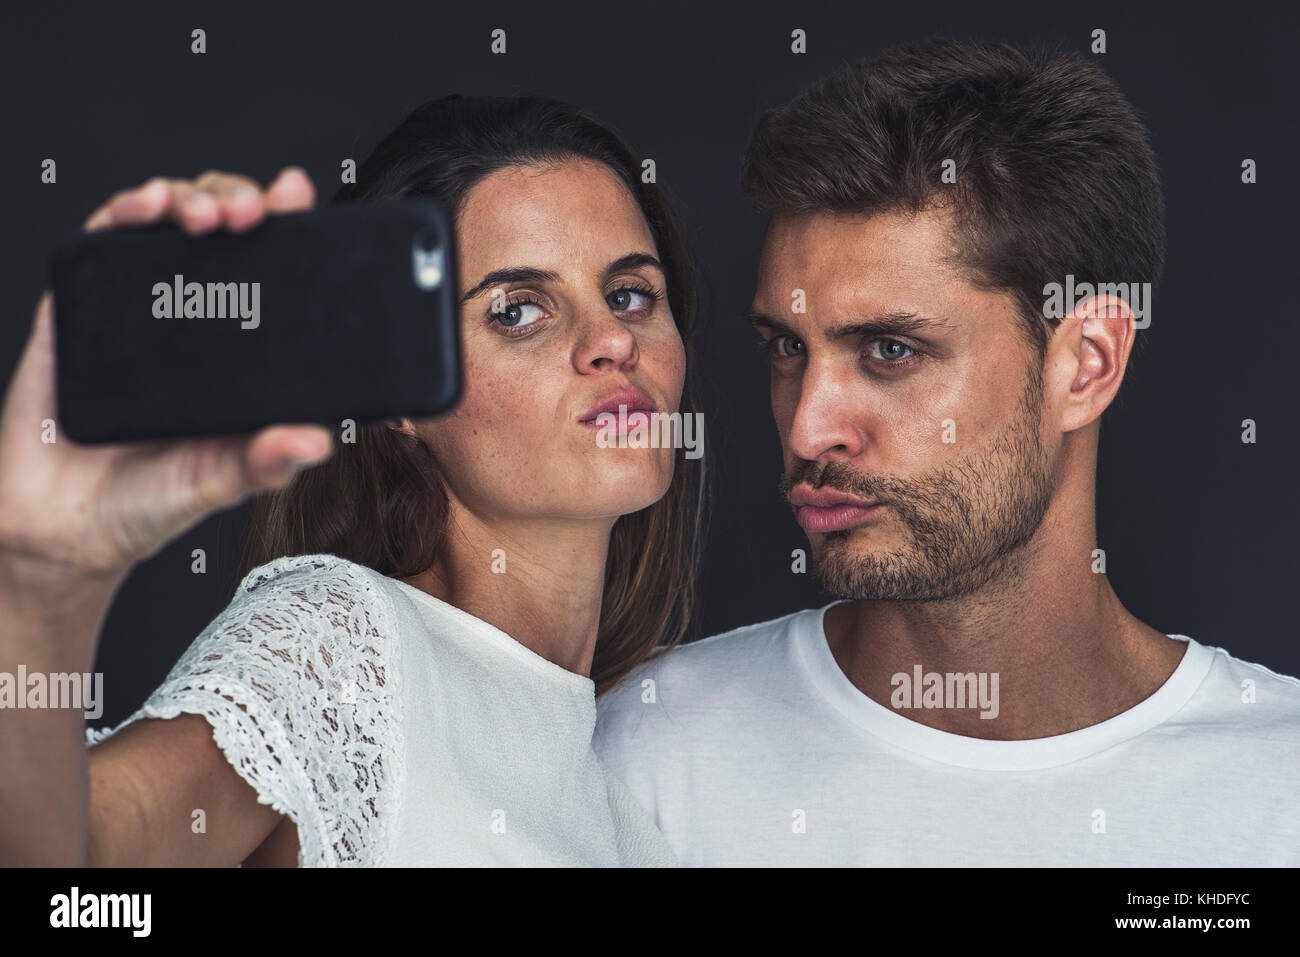 Couple posing for a selfie together Stock Photo